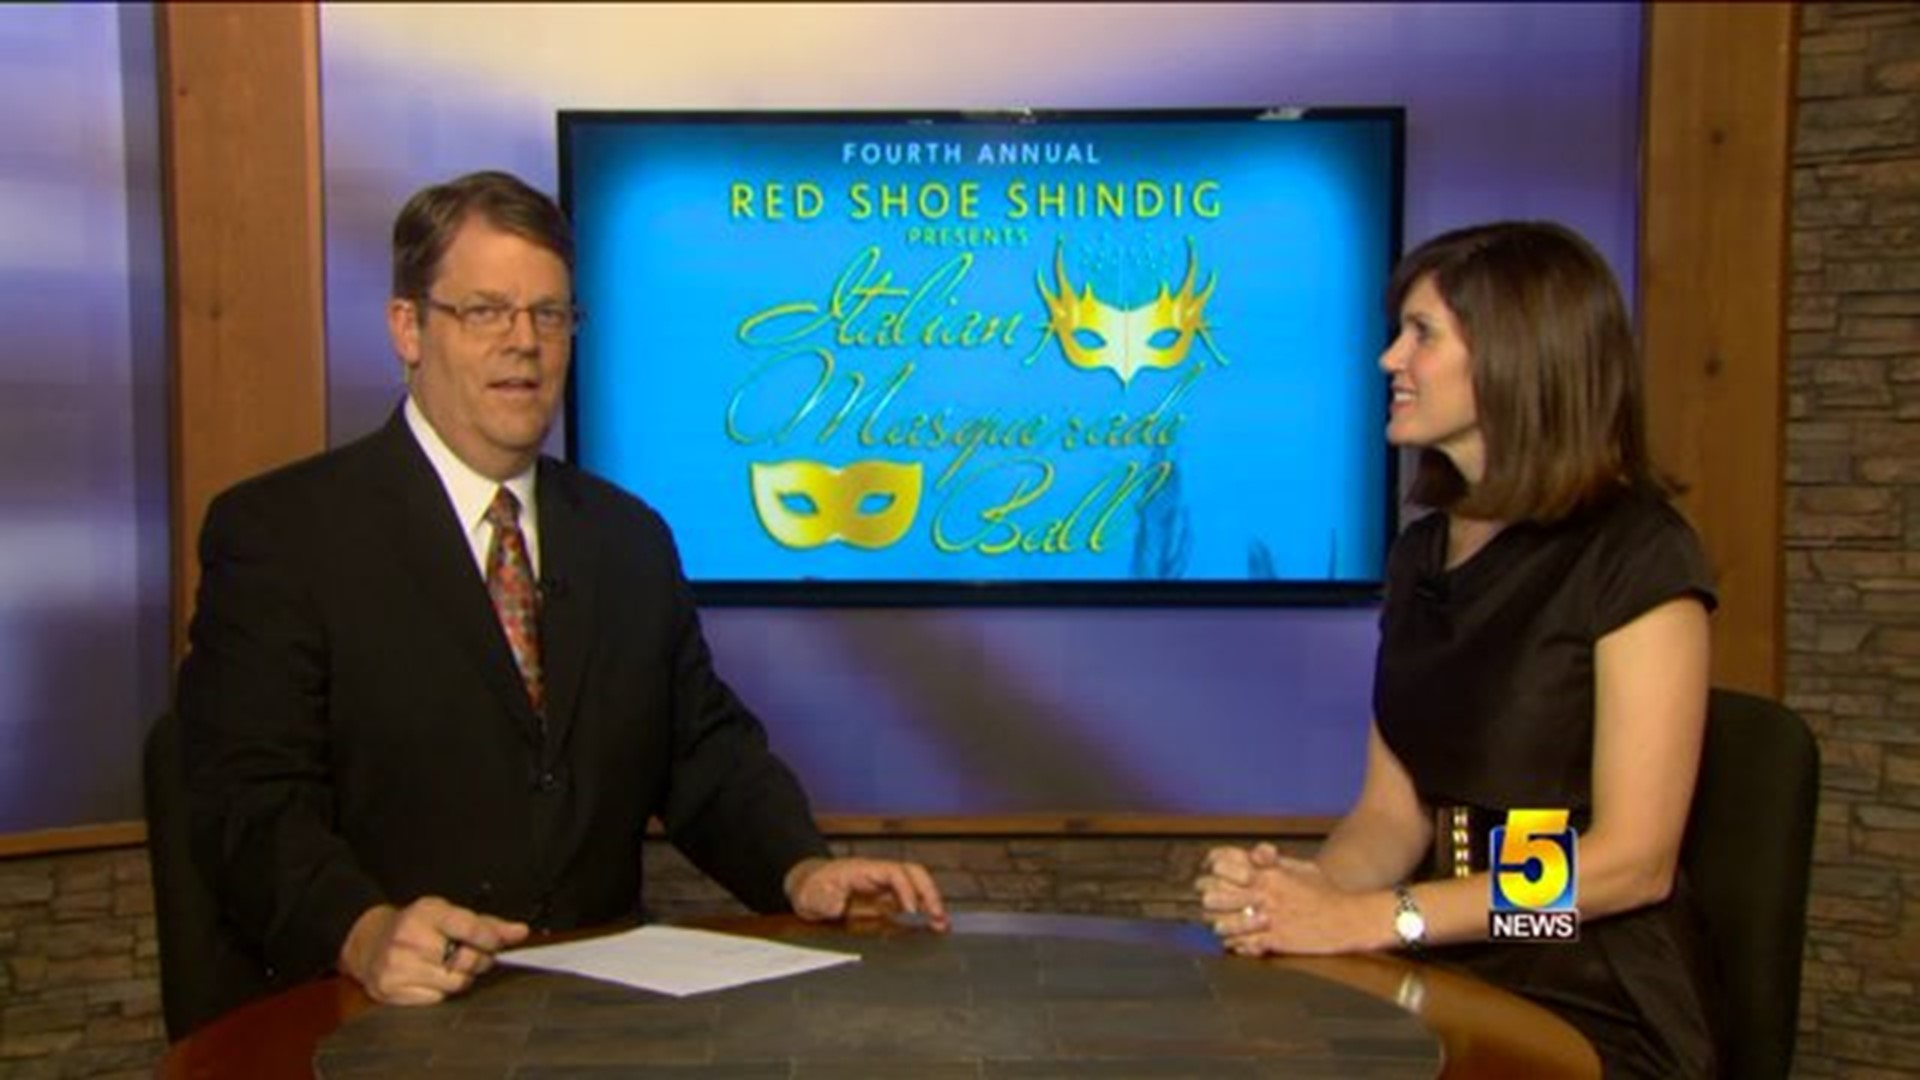 The Red Shoe Shindig